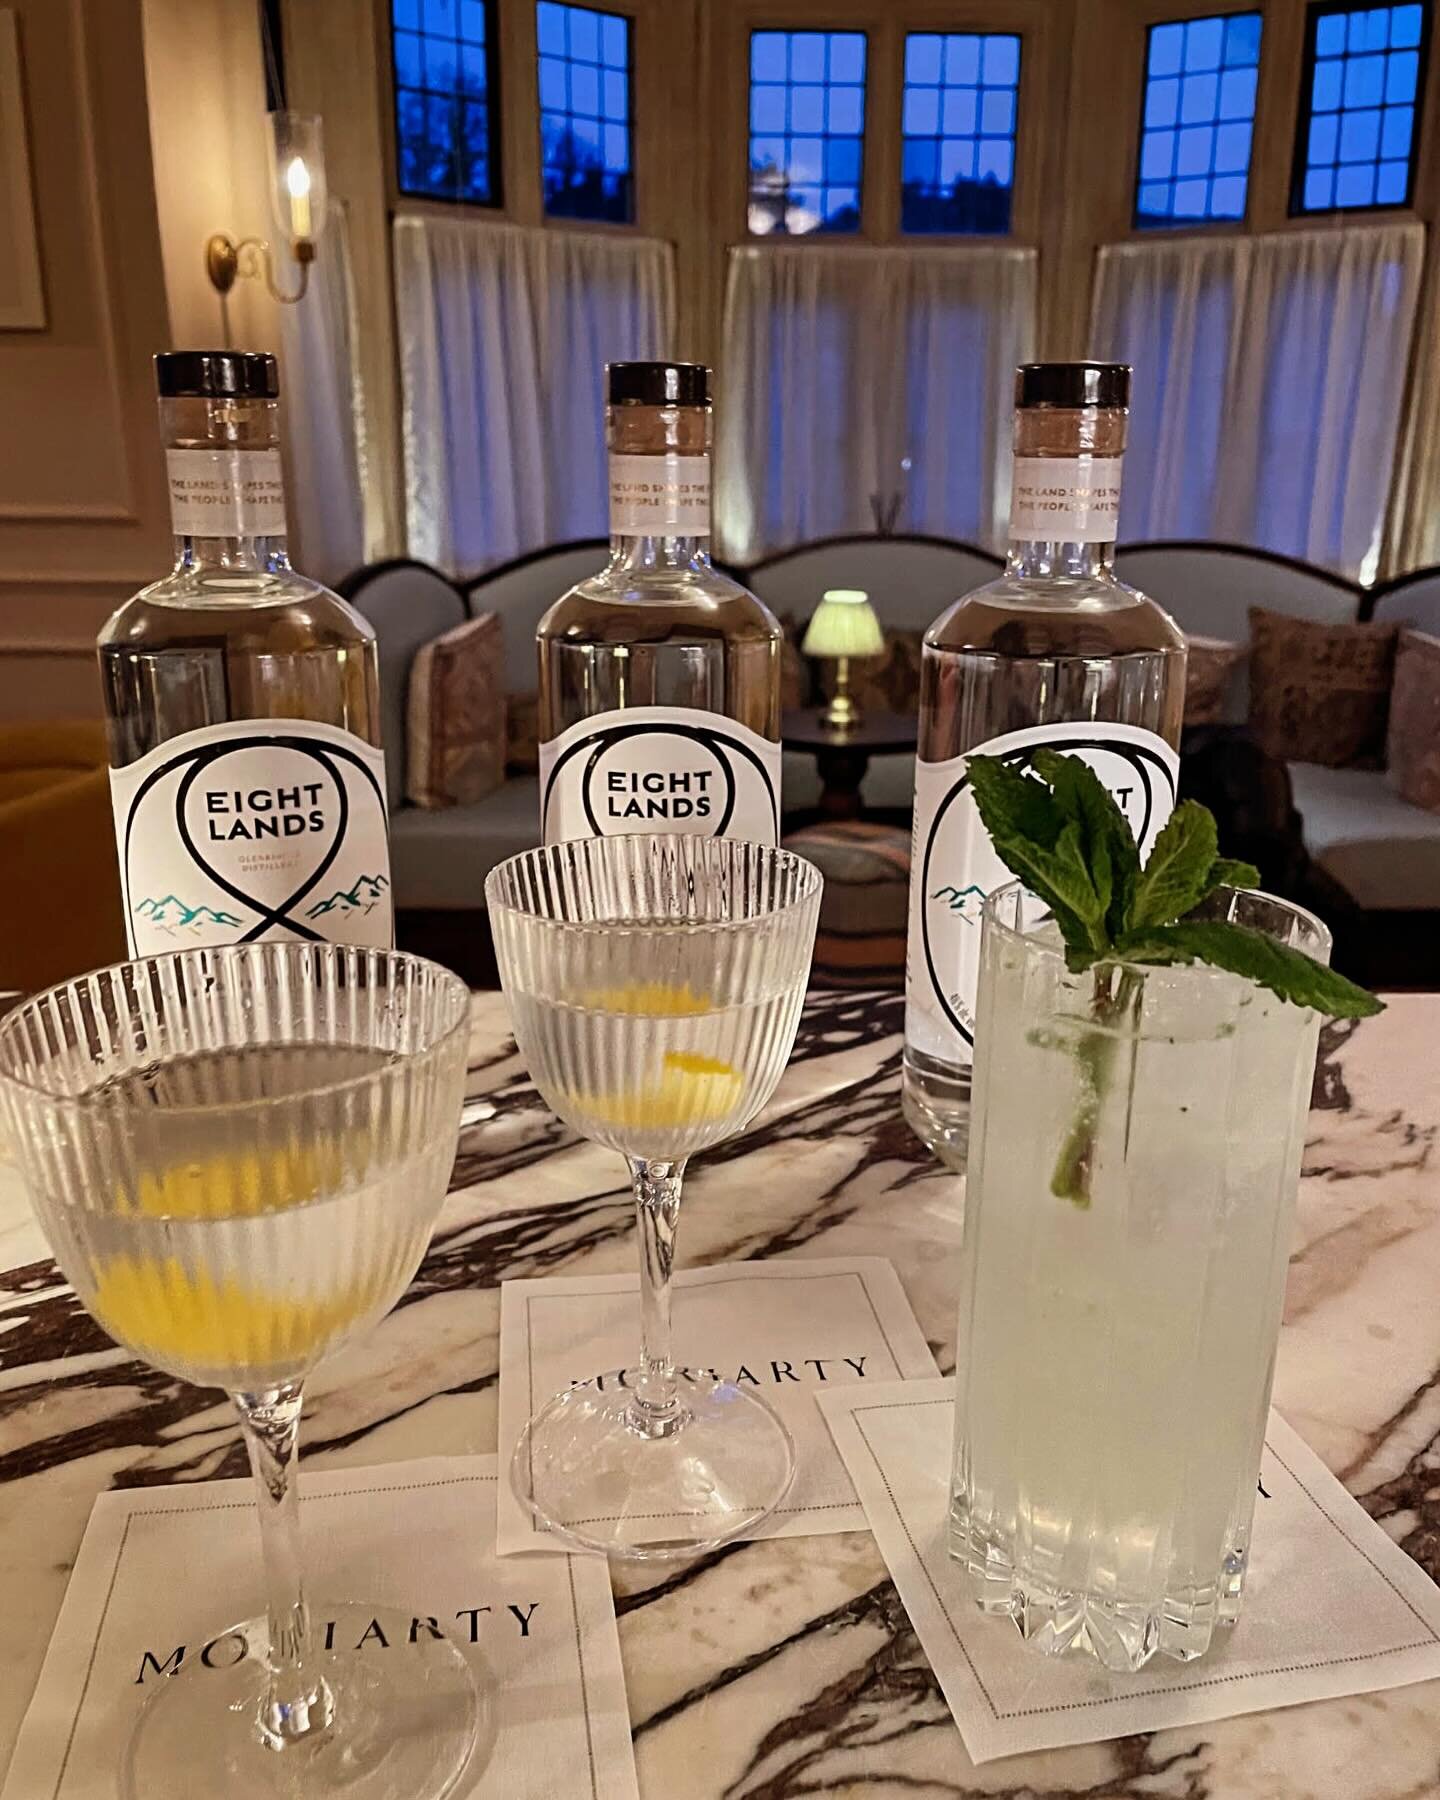 Always a pleasure to support @walpole_uk events, this time at the fabulous @kinhousewiltshire with @moriartyevents and @highballbrands. Nothing better than sharing some of our favourite Eight Lands cocktails with friends new and old! 🍸
-
#eightlands